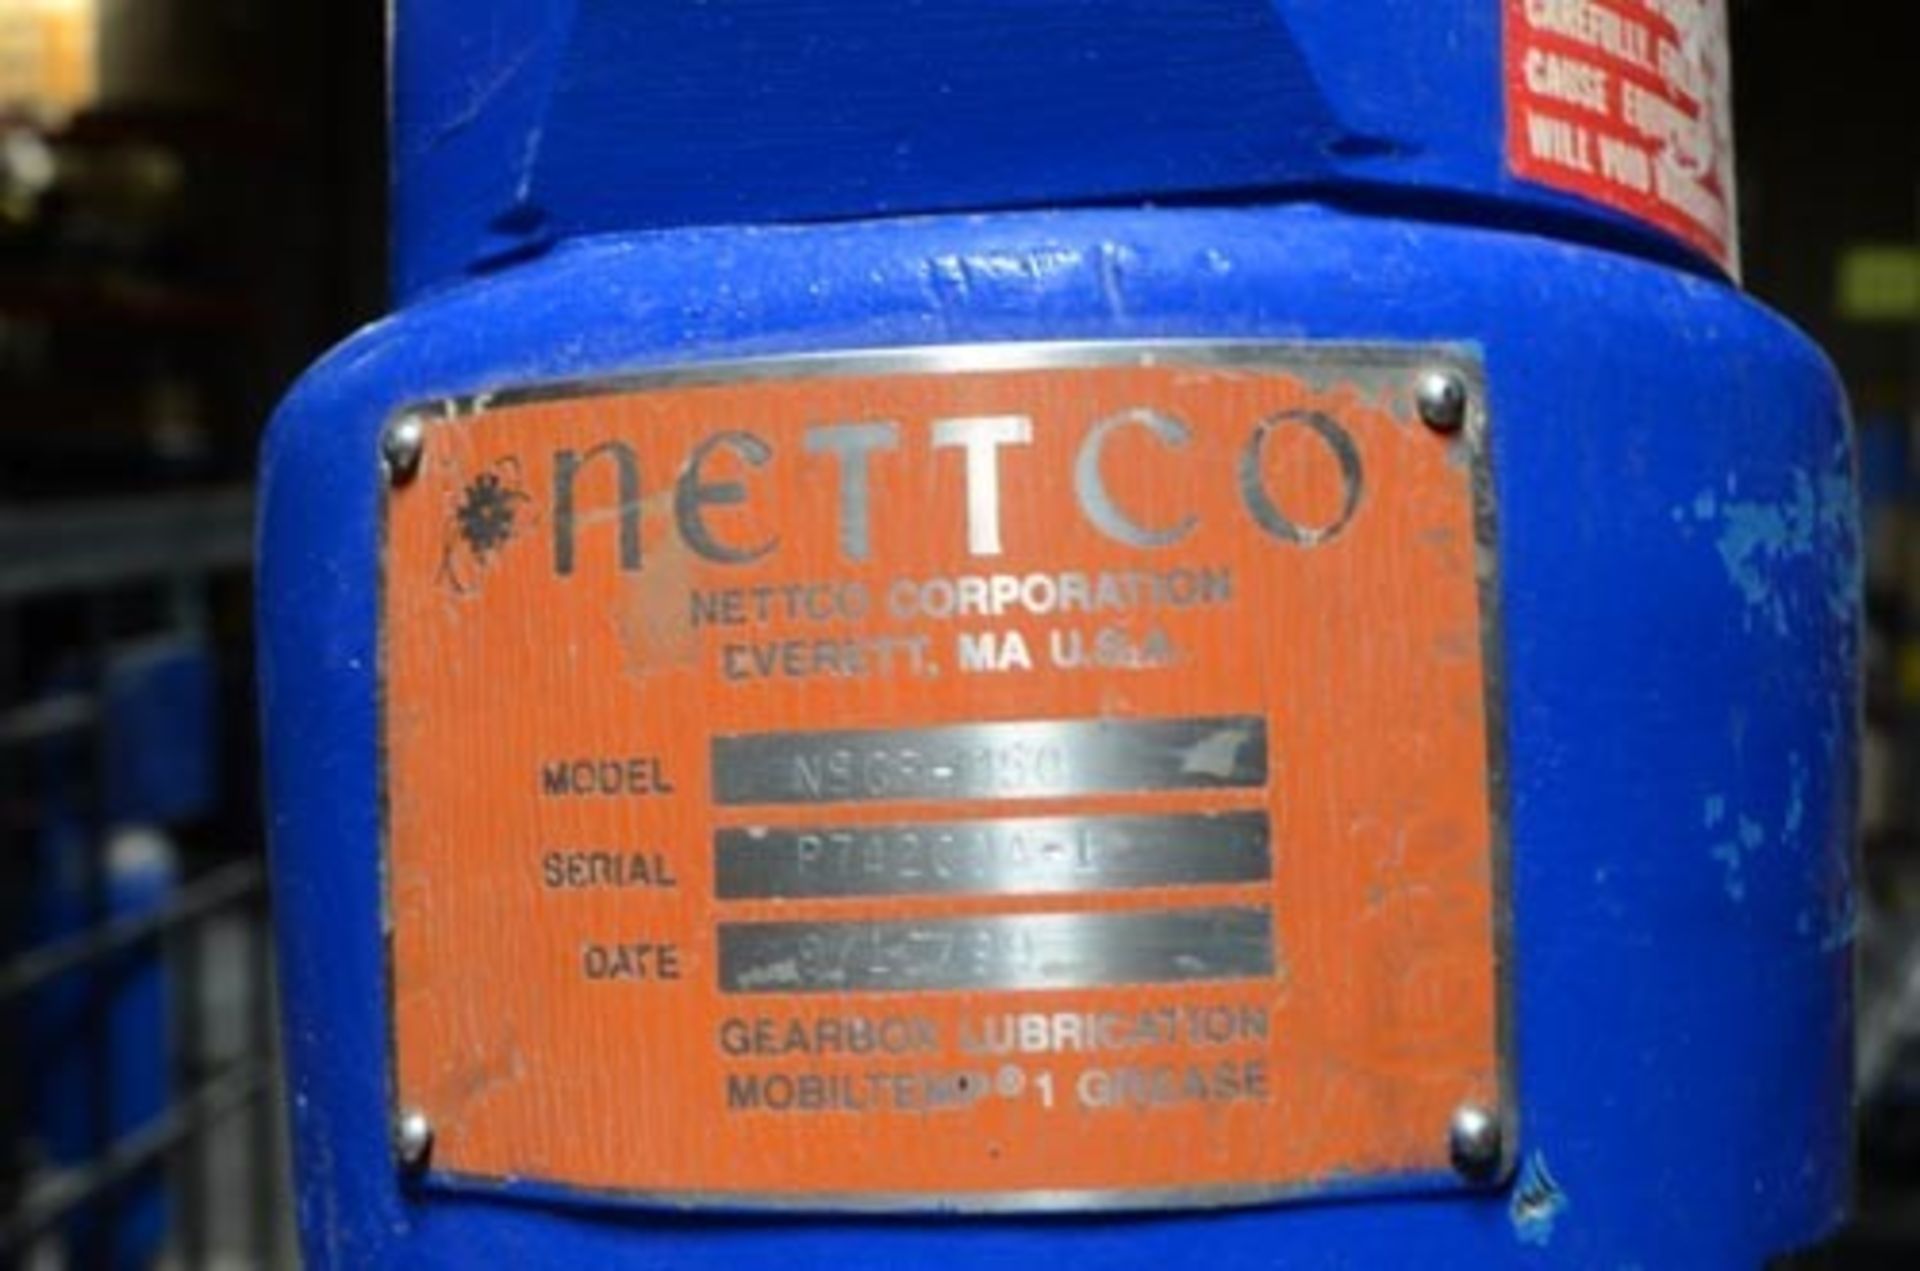 Nettco NSGF-050 Mixer with Large Stainless Steel Tank (Loading Fee $25) (Located Lebanon, PA) - Image 4 of 5